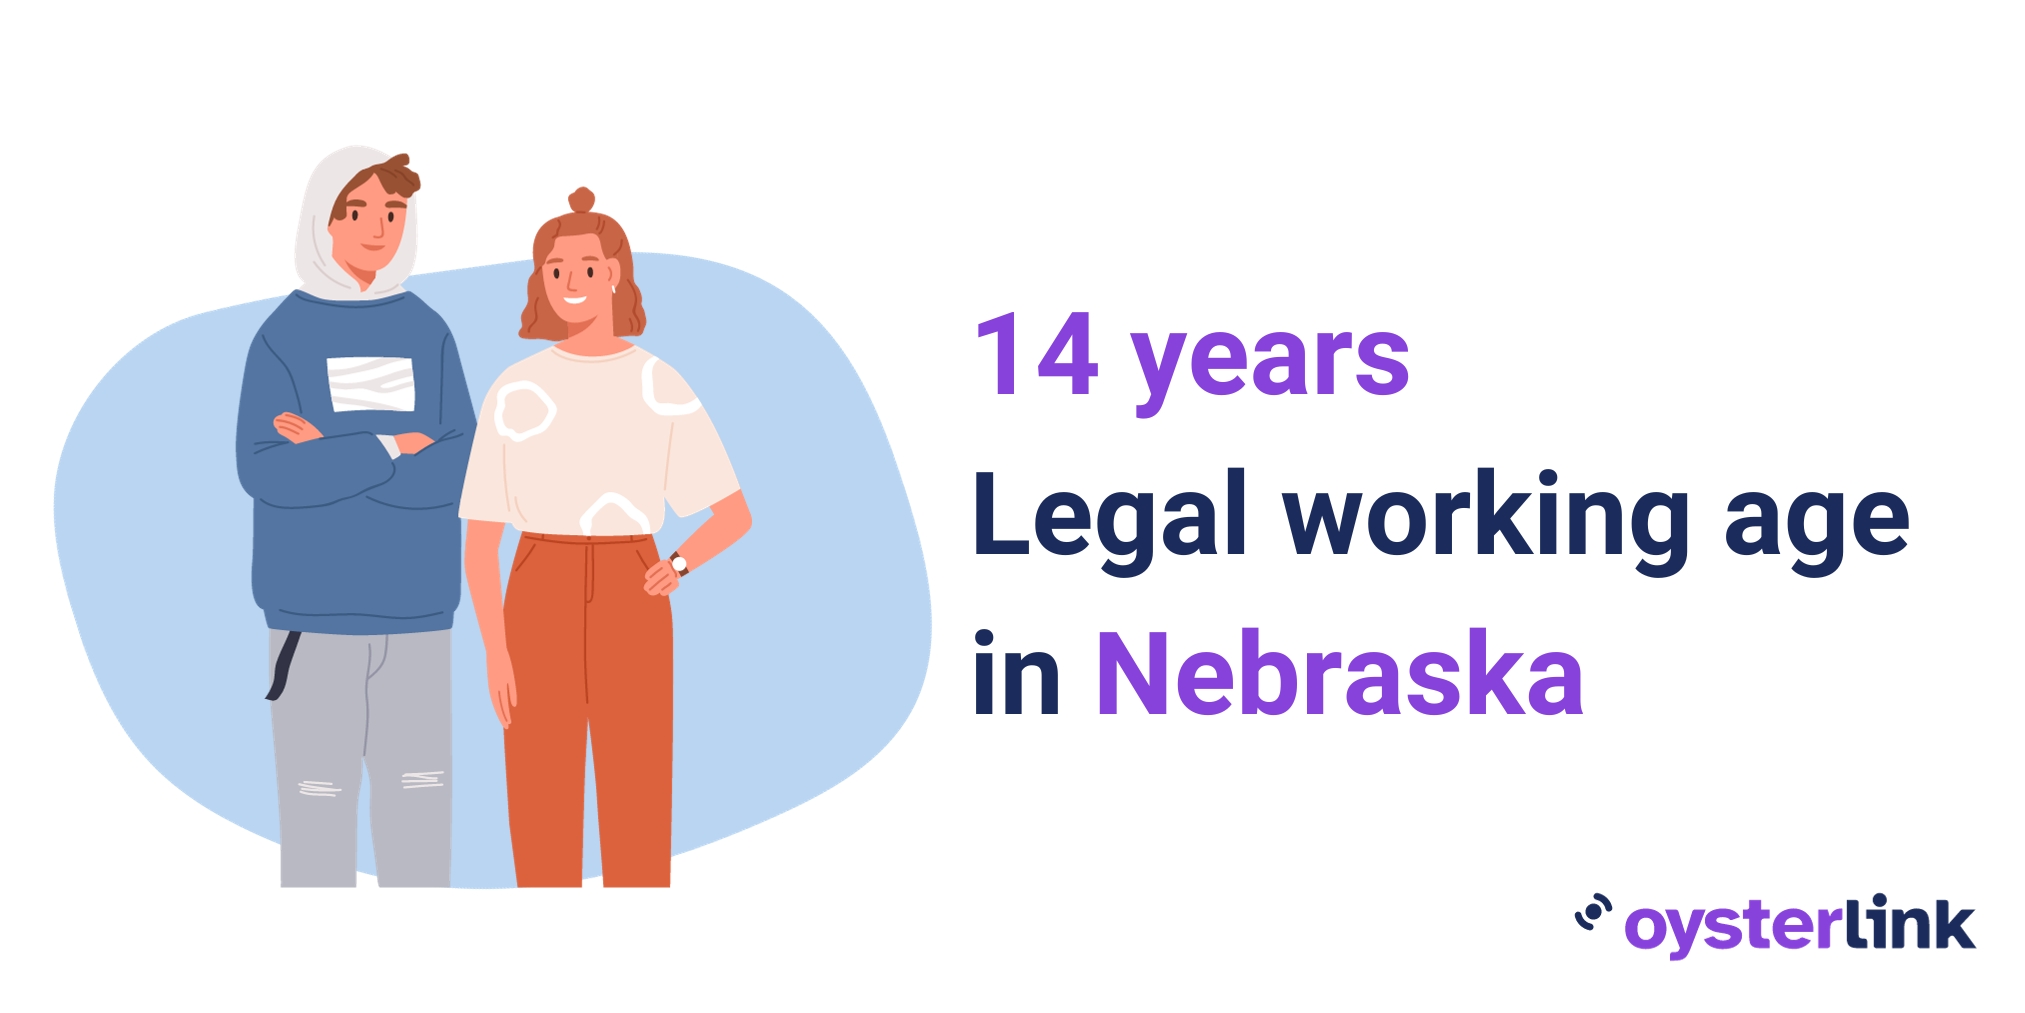 14 years of age is the minimum legal age requirement for employment